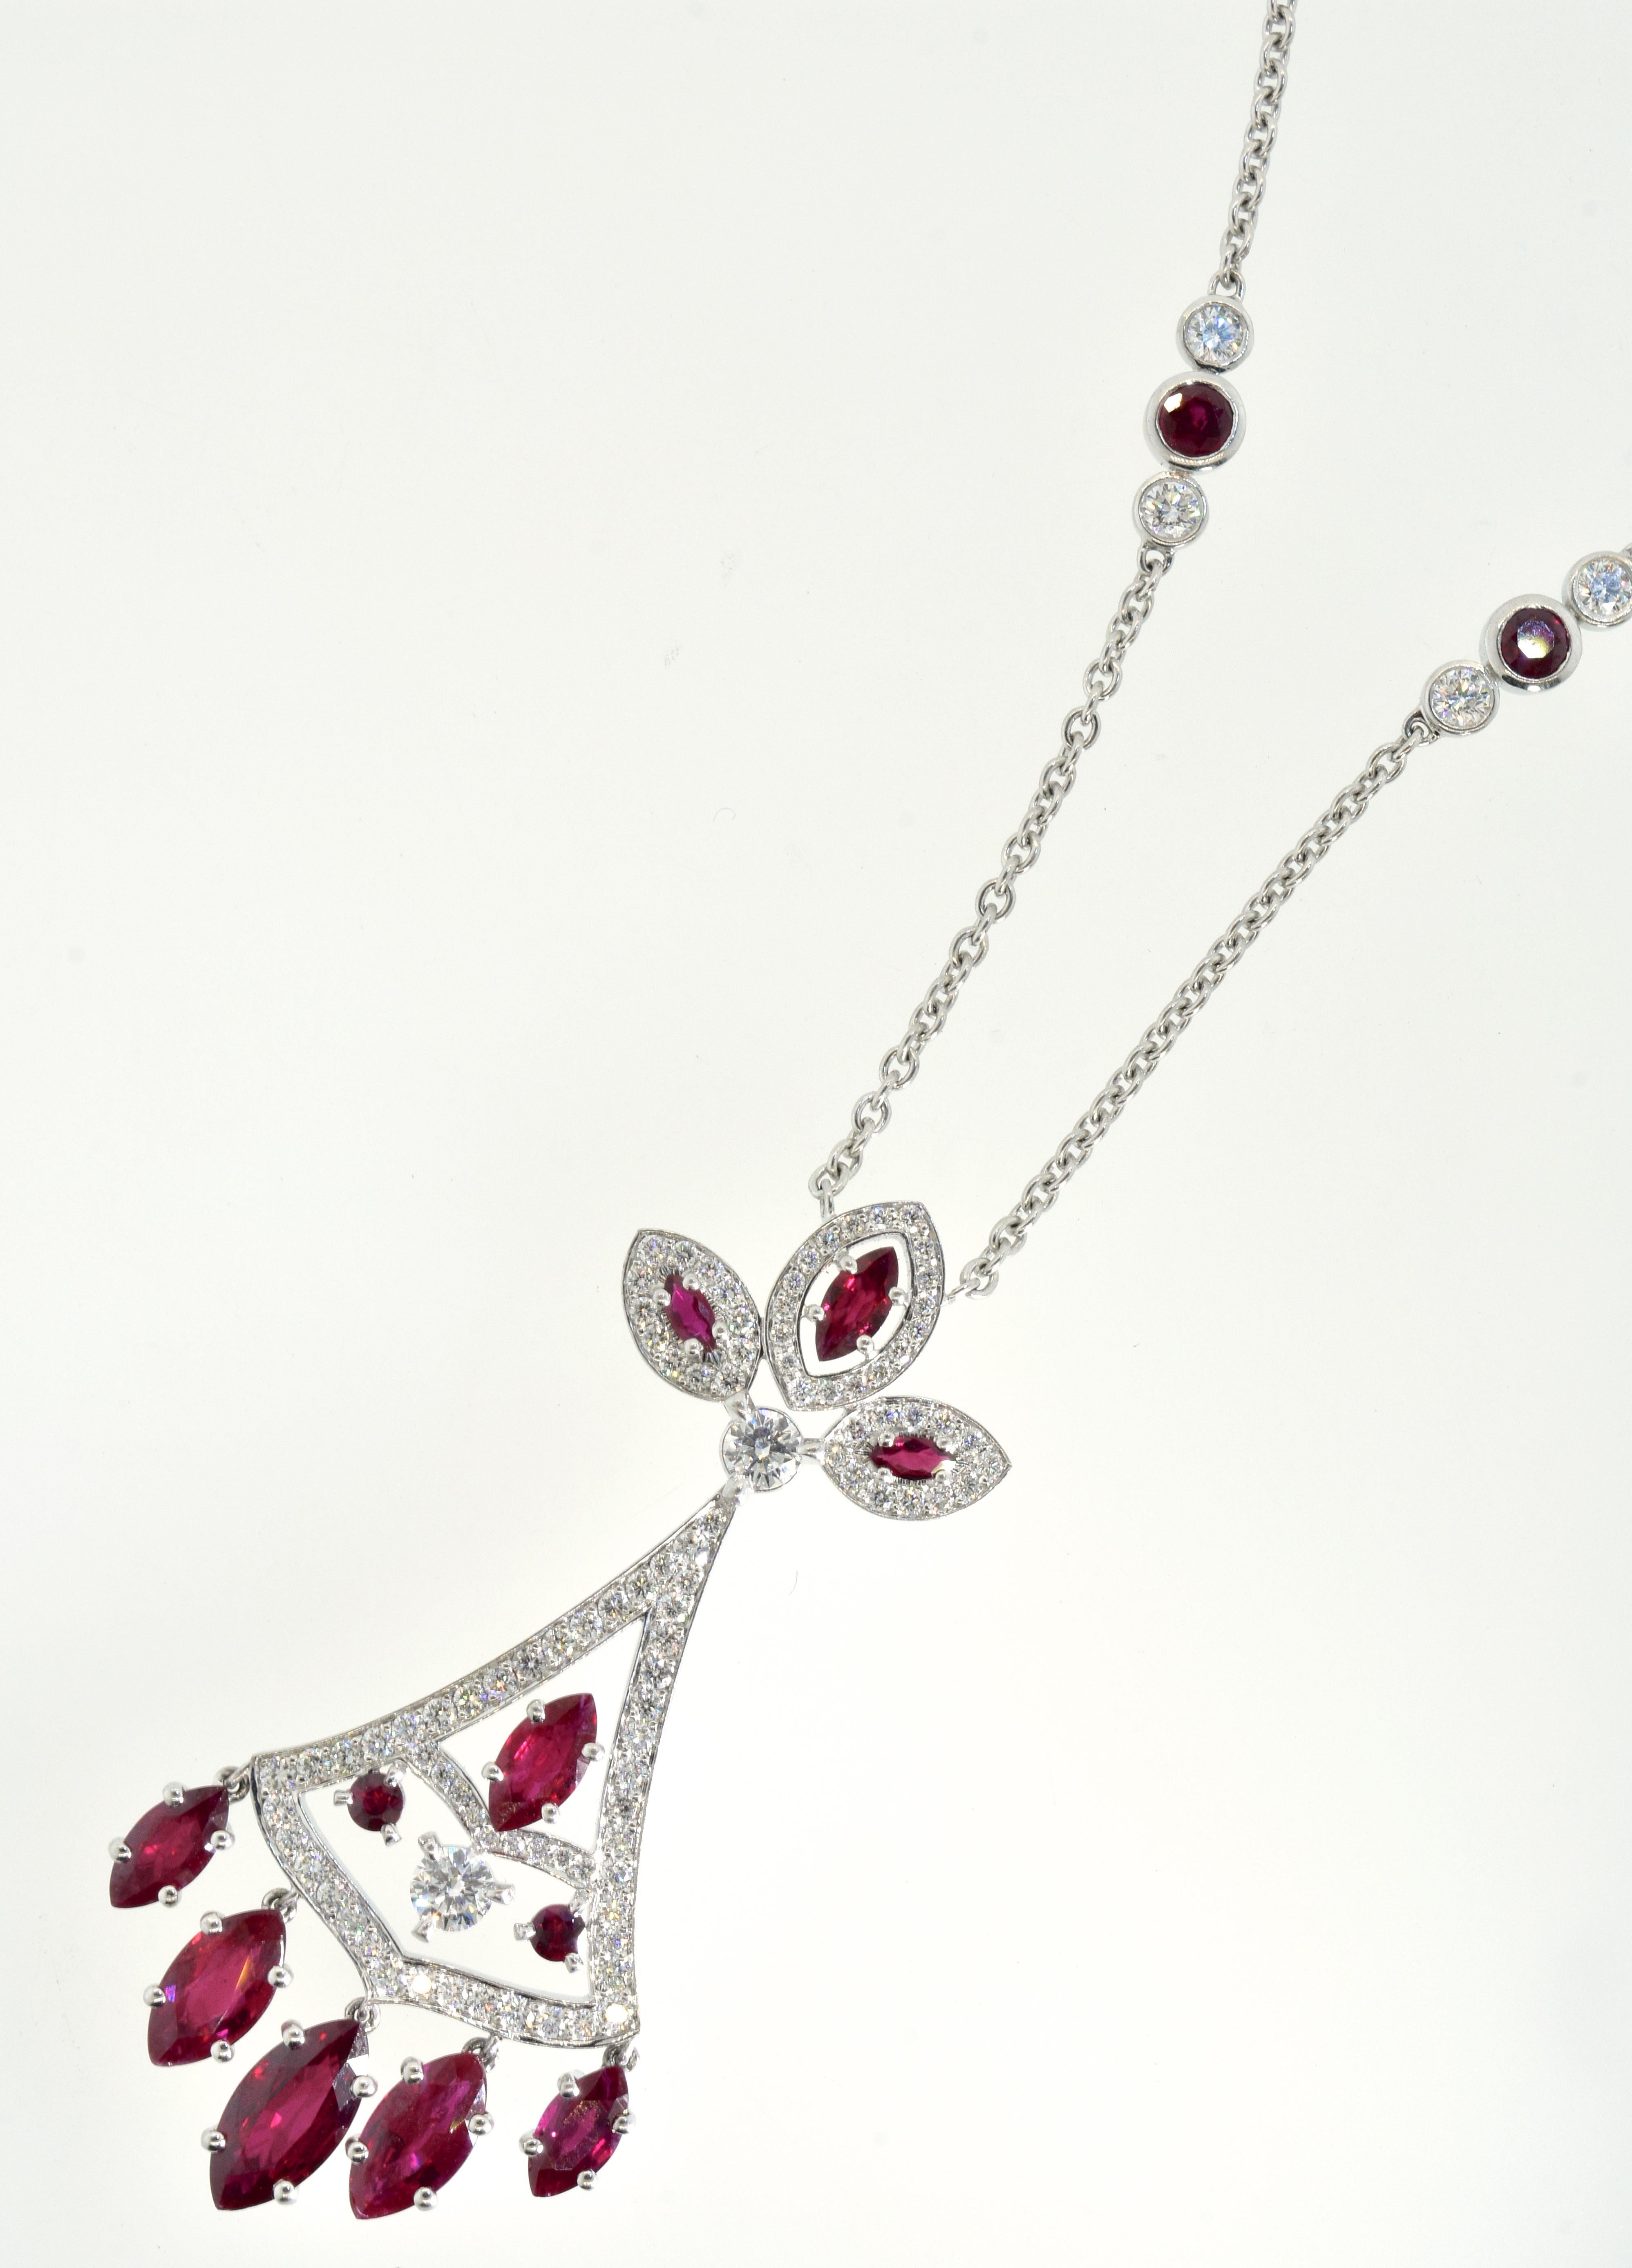 Burma rubies all well matched, bright pure red color and clean with an approximate weight of 6 cts. There are 116 well matched diamonds - all colorless to near colorless (F/G), and very very slightly included.  The estimated diamond weight is 4.5